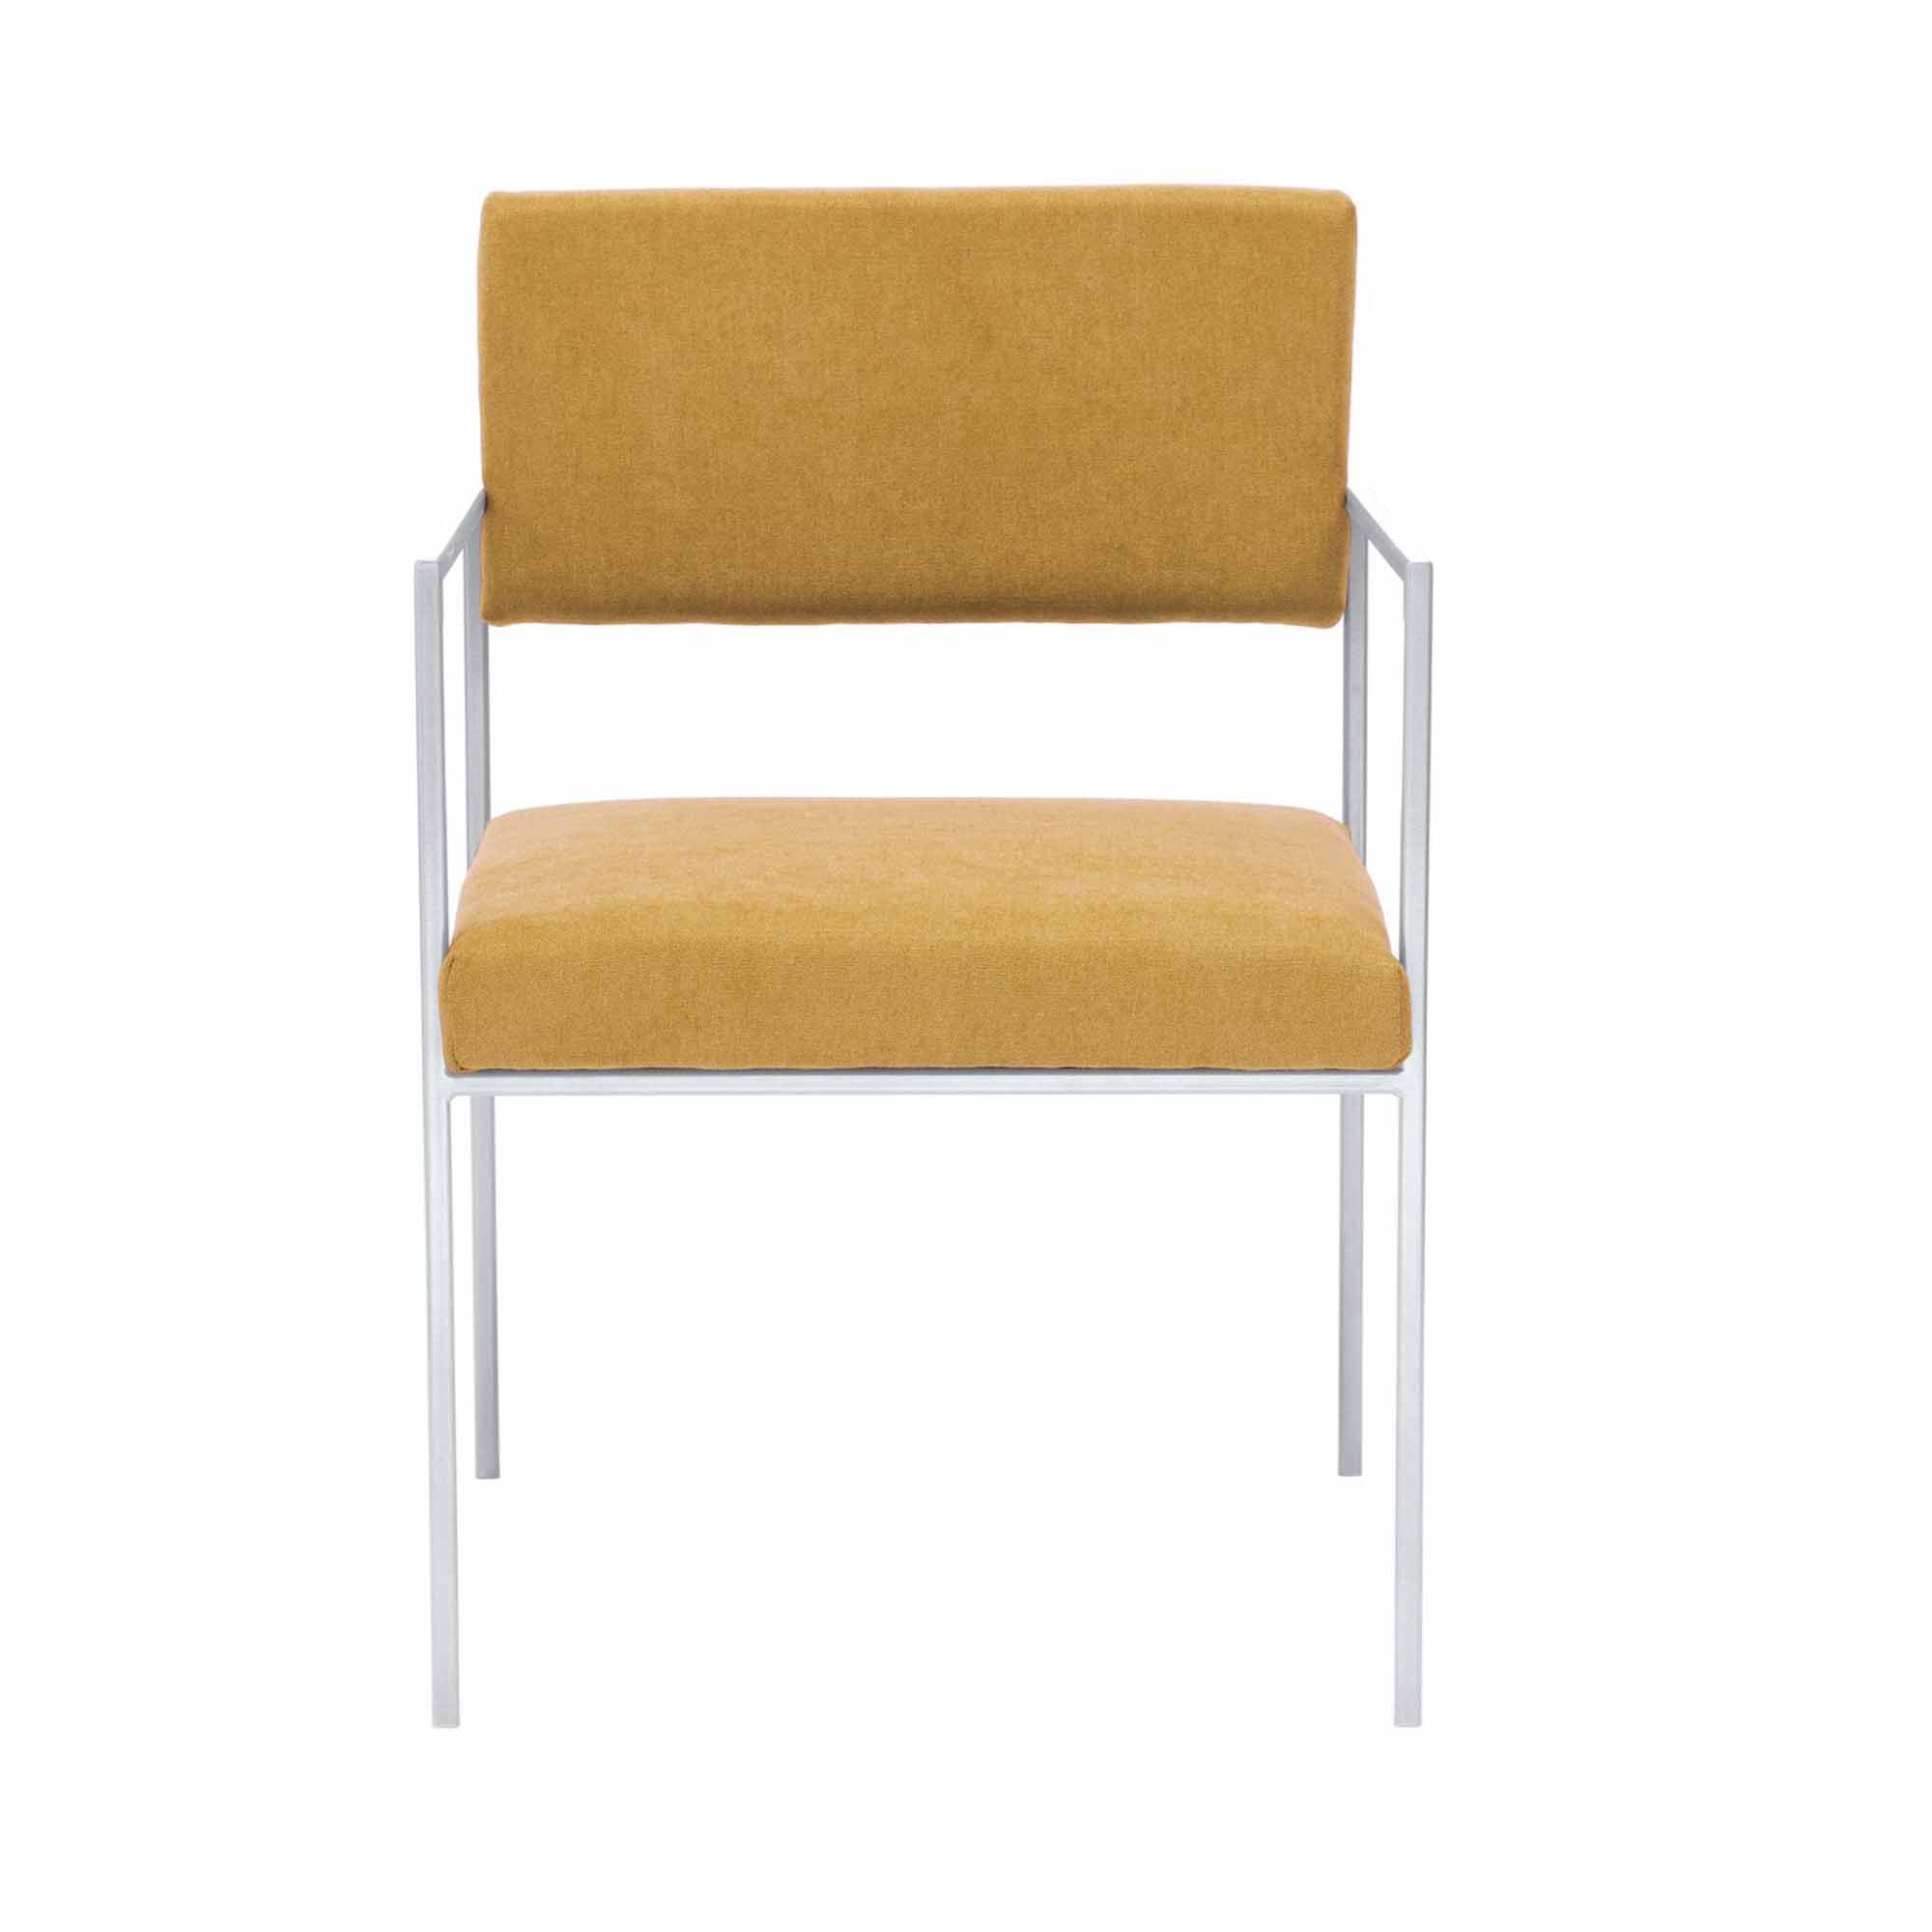 CUBE Armchair, Powder-Coated Steel Frame yellow fabric, white frame, front view